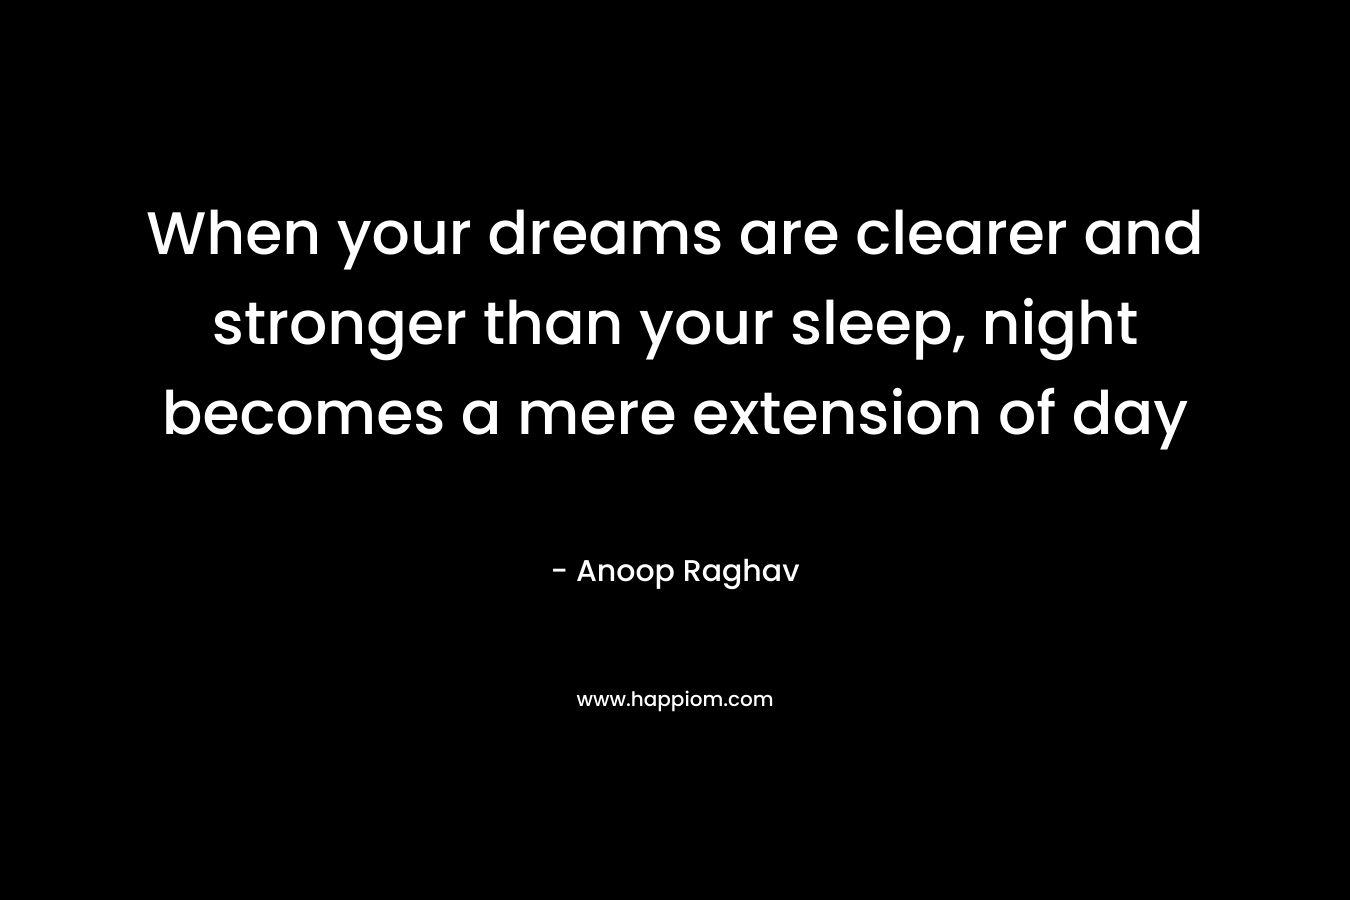 When your dreams are clearer and stronger than your sleep, night becomes a mere extension of day – Anoop Raghav